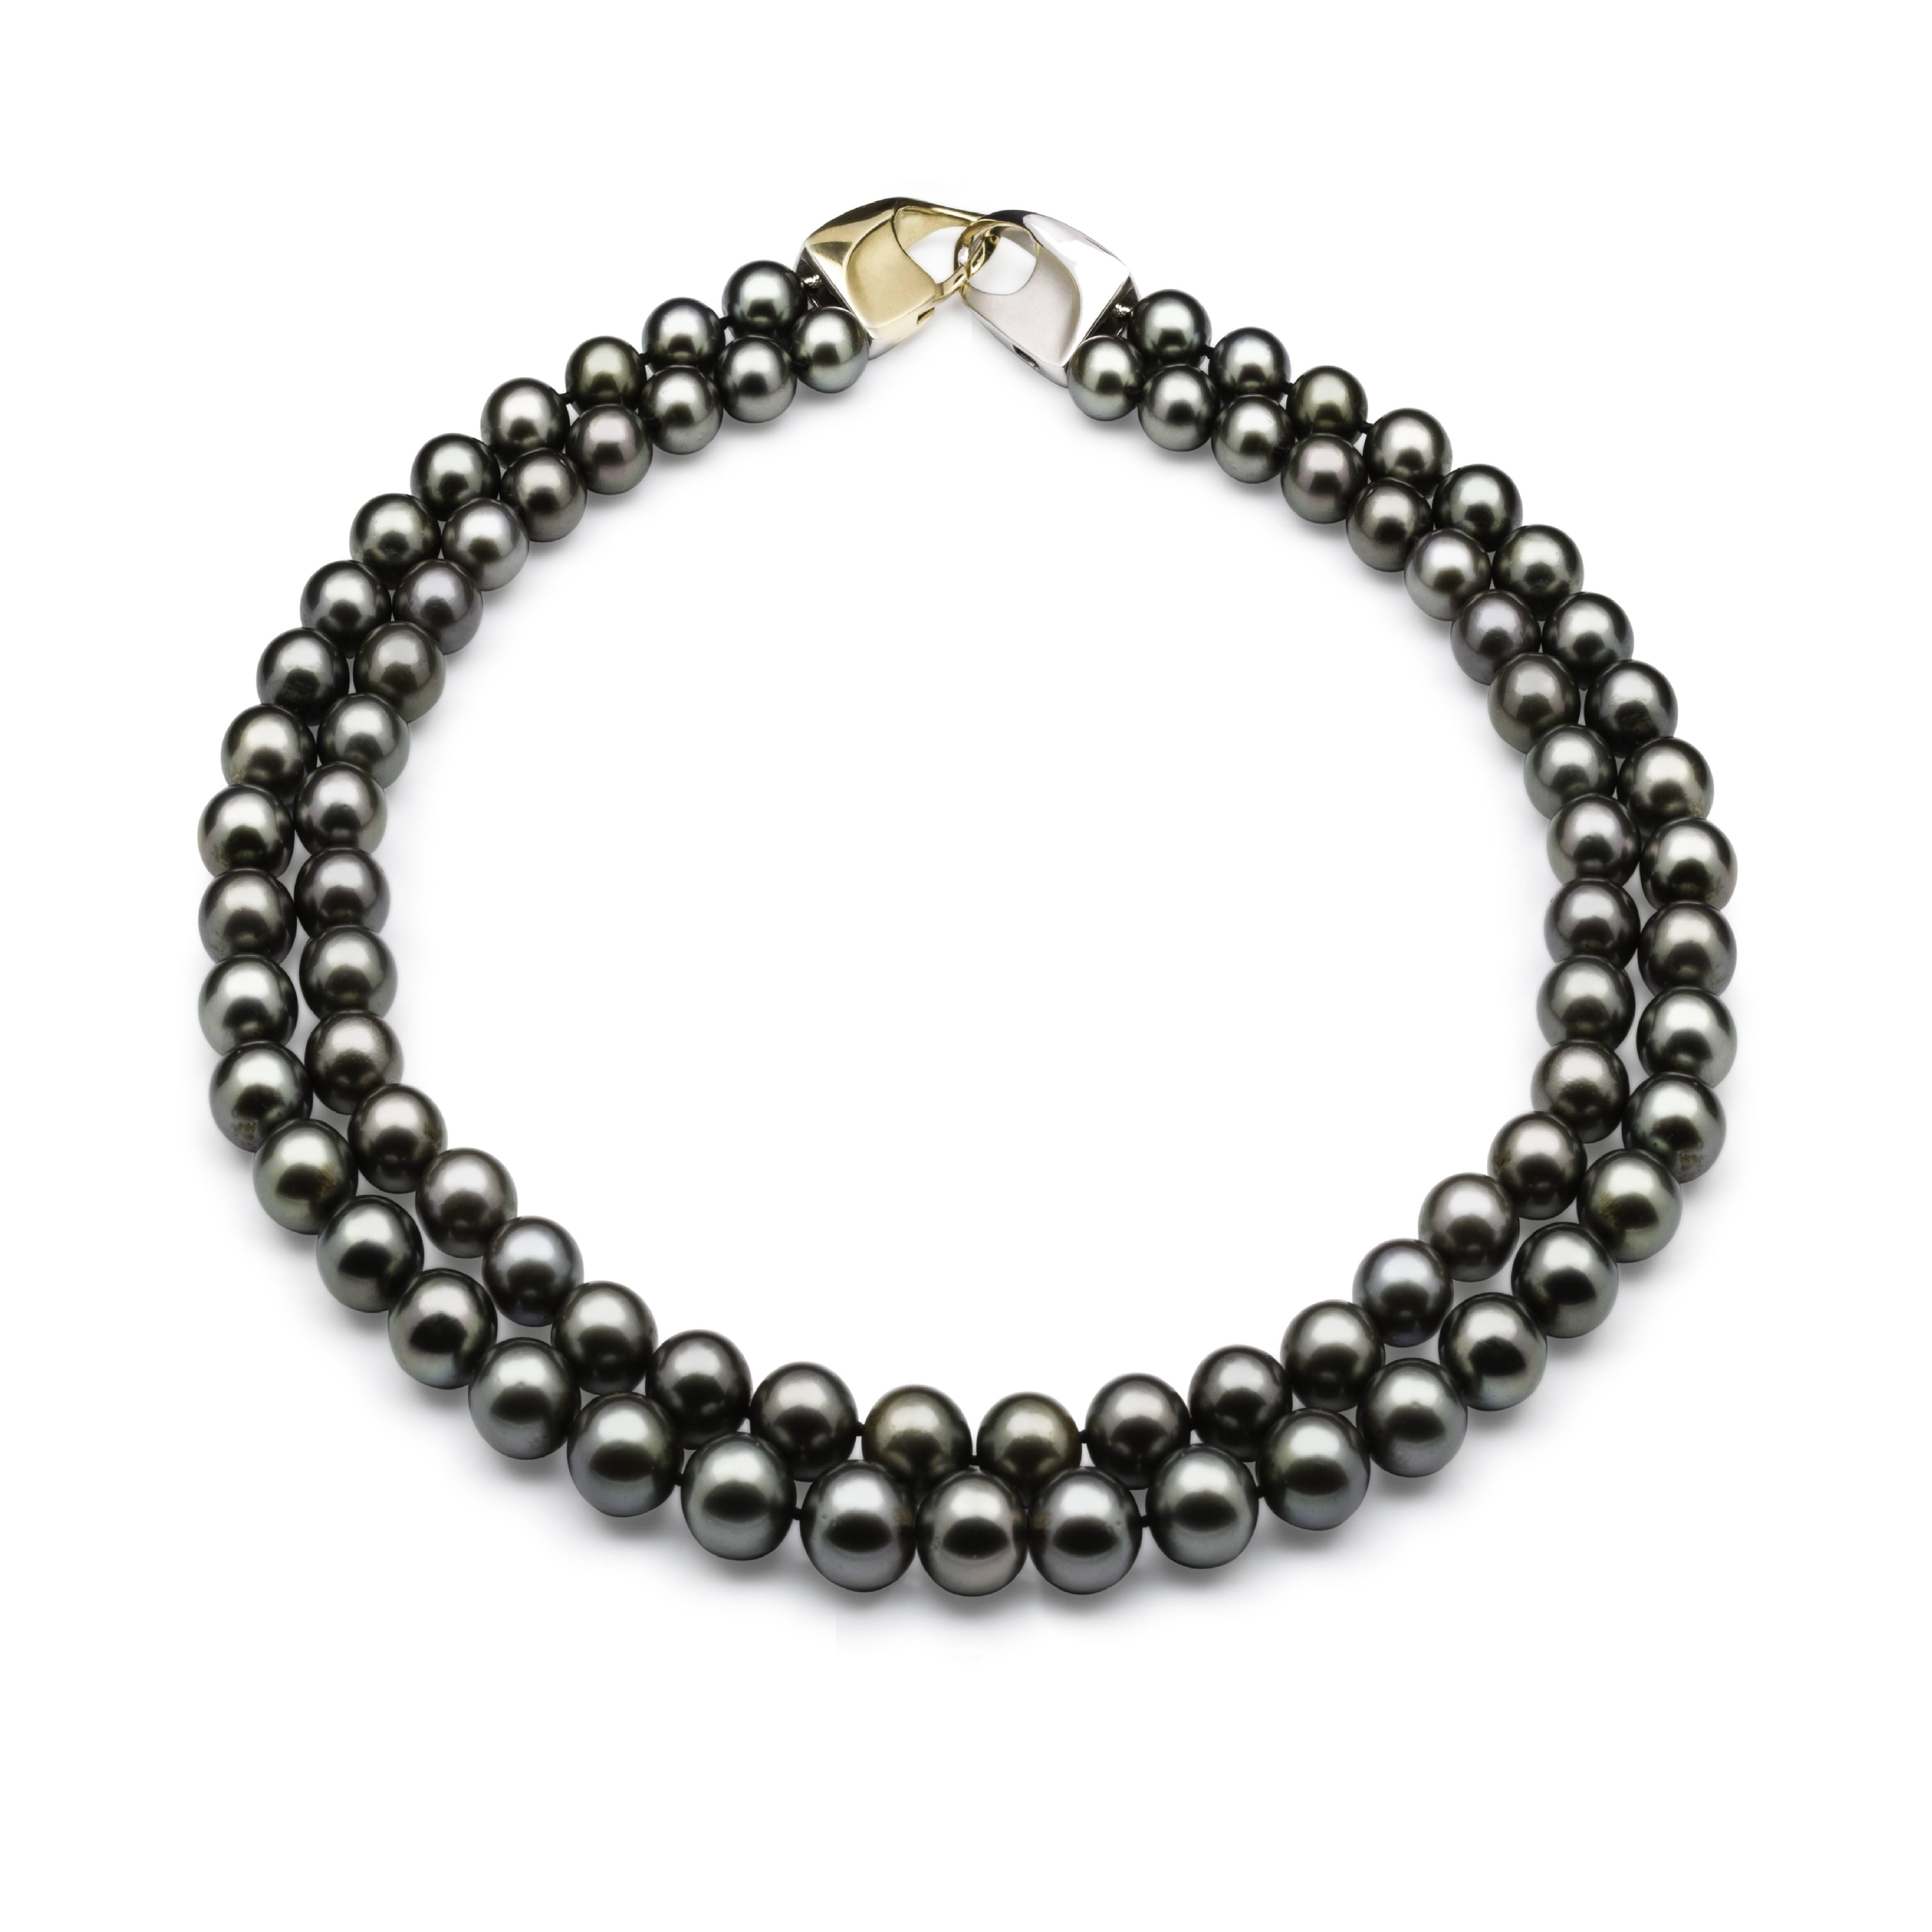 Tahitian black beauty...

2 rows of Tahitian South Sea pearls ranging in size from 8 mm to 11 mm, 
they are round in shape, grade 1 in quality, fine nacre, 2 luster, beautifully matching dark green grey colors.

The 2 strands together consist of 83